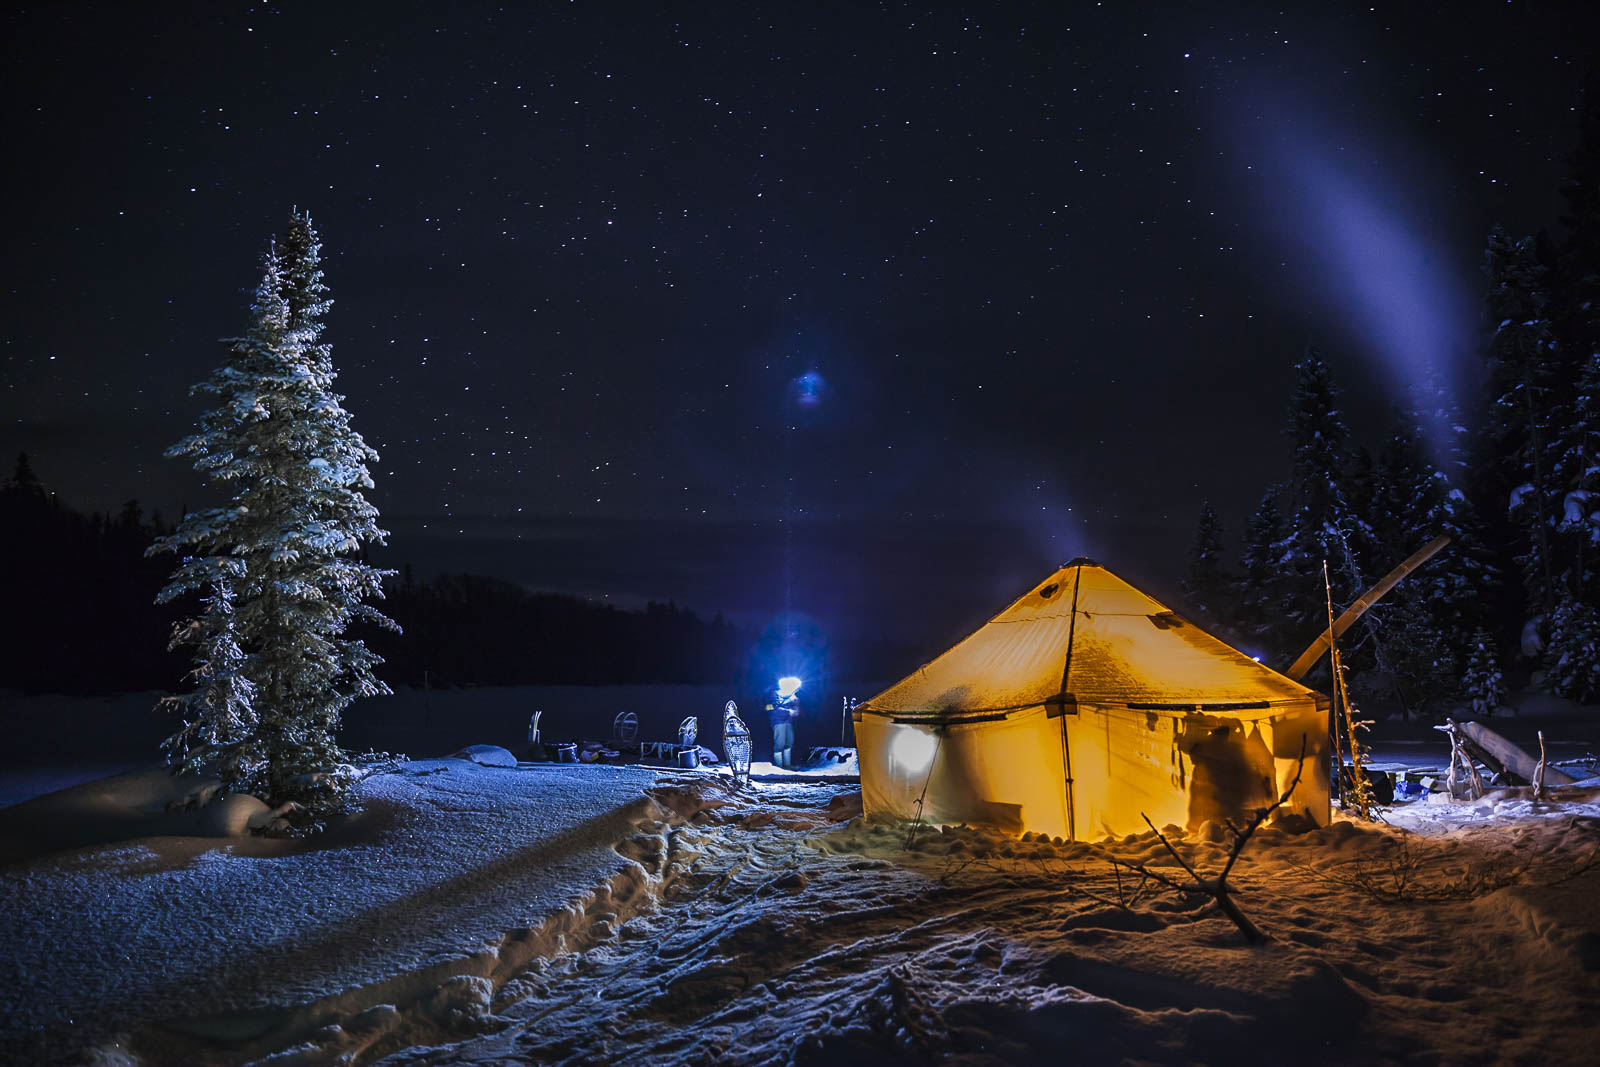 Winter camping tips: 26 things beginners should know, MEC Blog